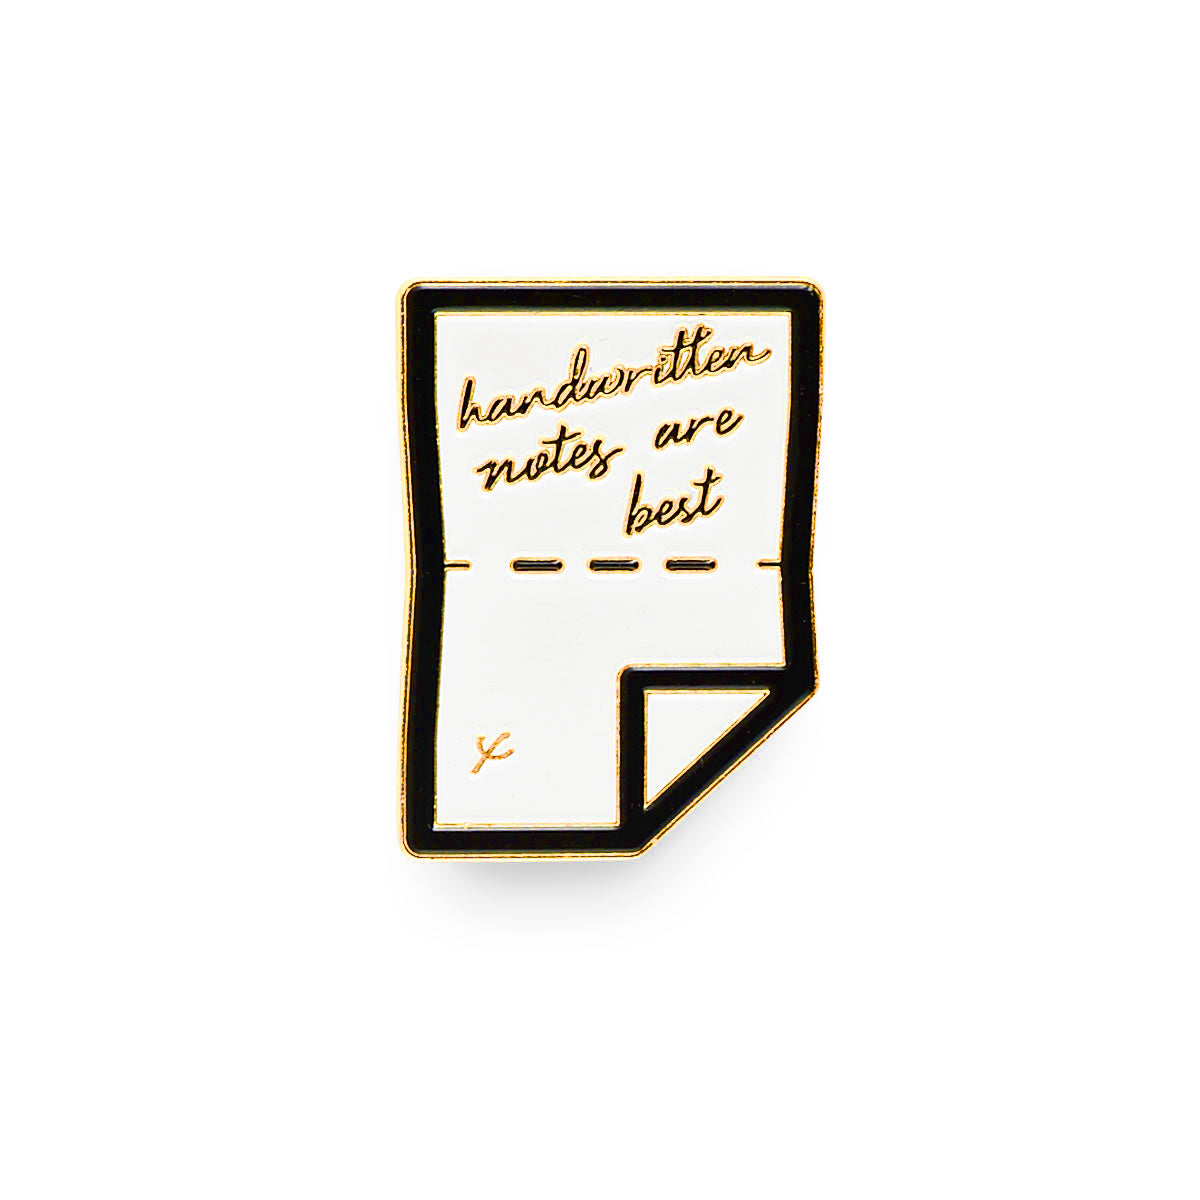 Wrinkle and Crease Handwritten Notes Are Best Enamel Pin 